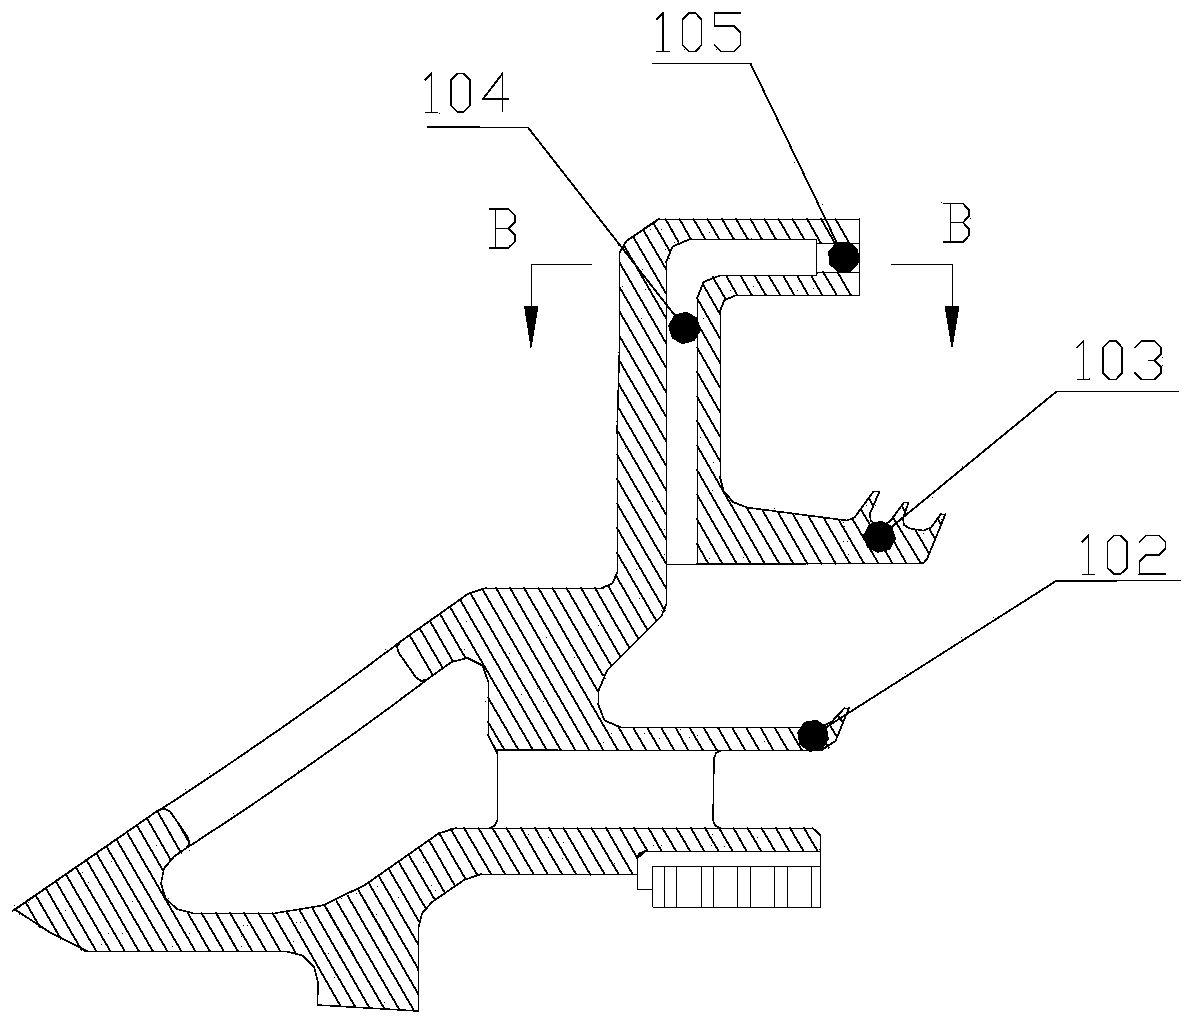 Turbine disk cavity sealing structure with bypass bleed air